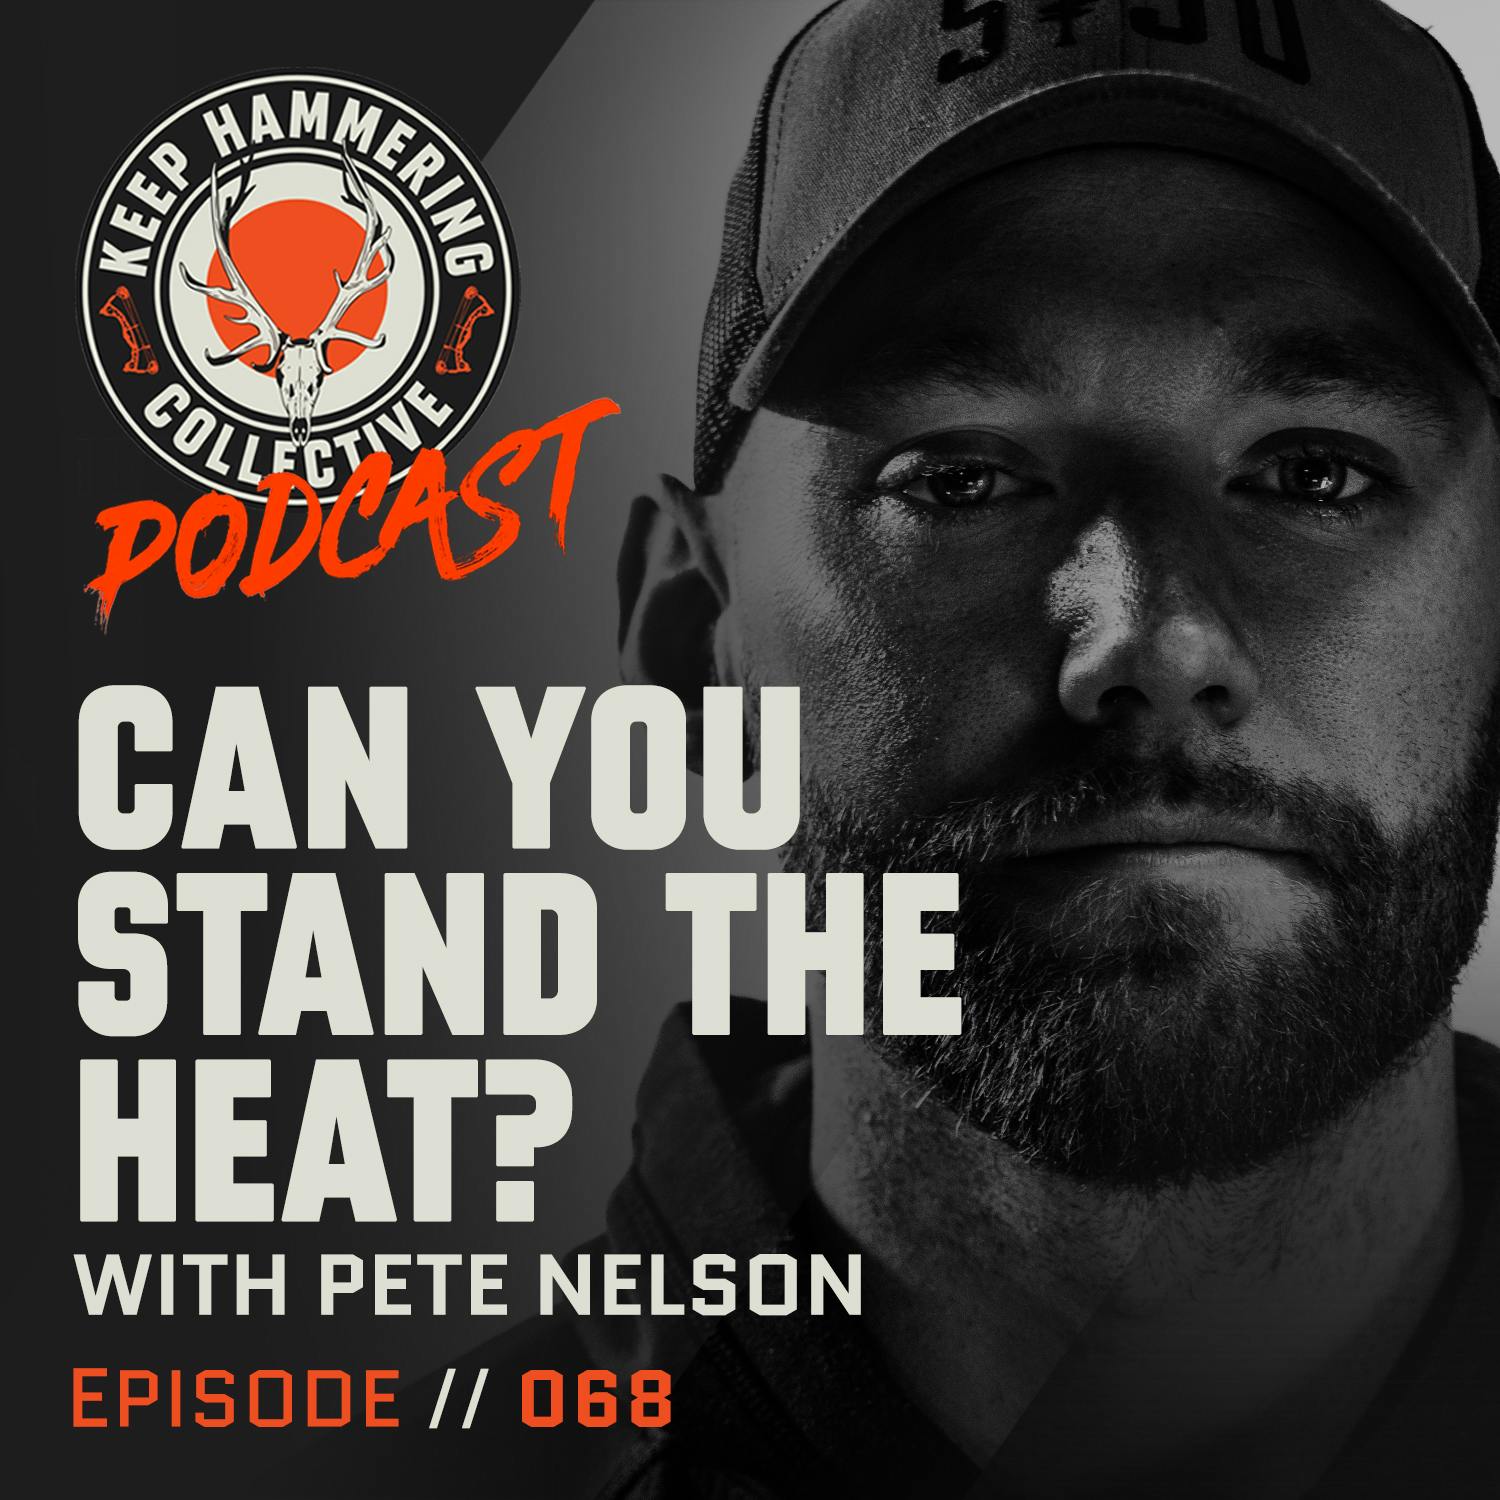 KHC 068 - “Can You Stand the Heat?” with Pete Nelson